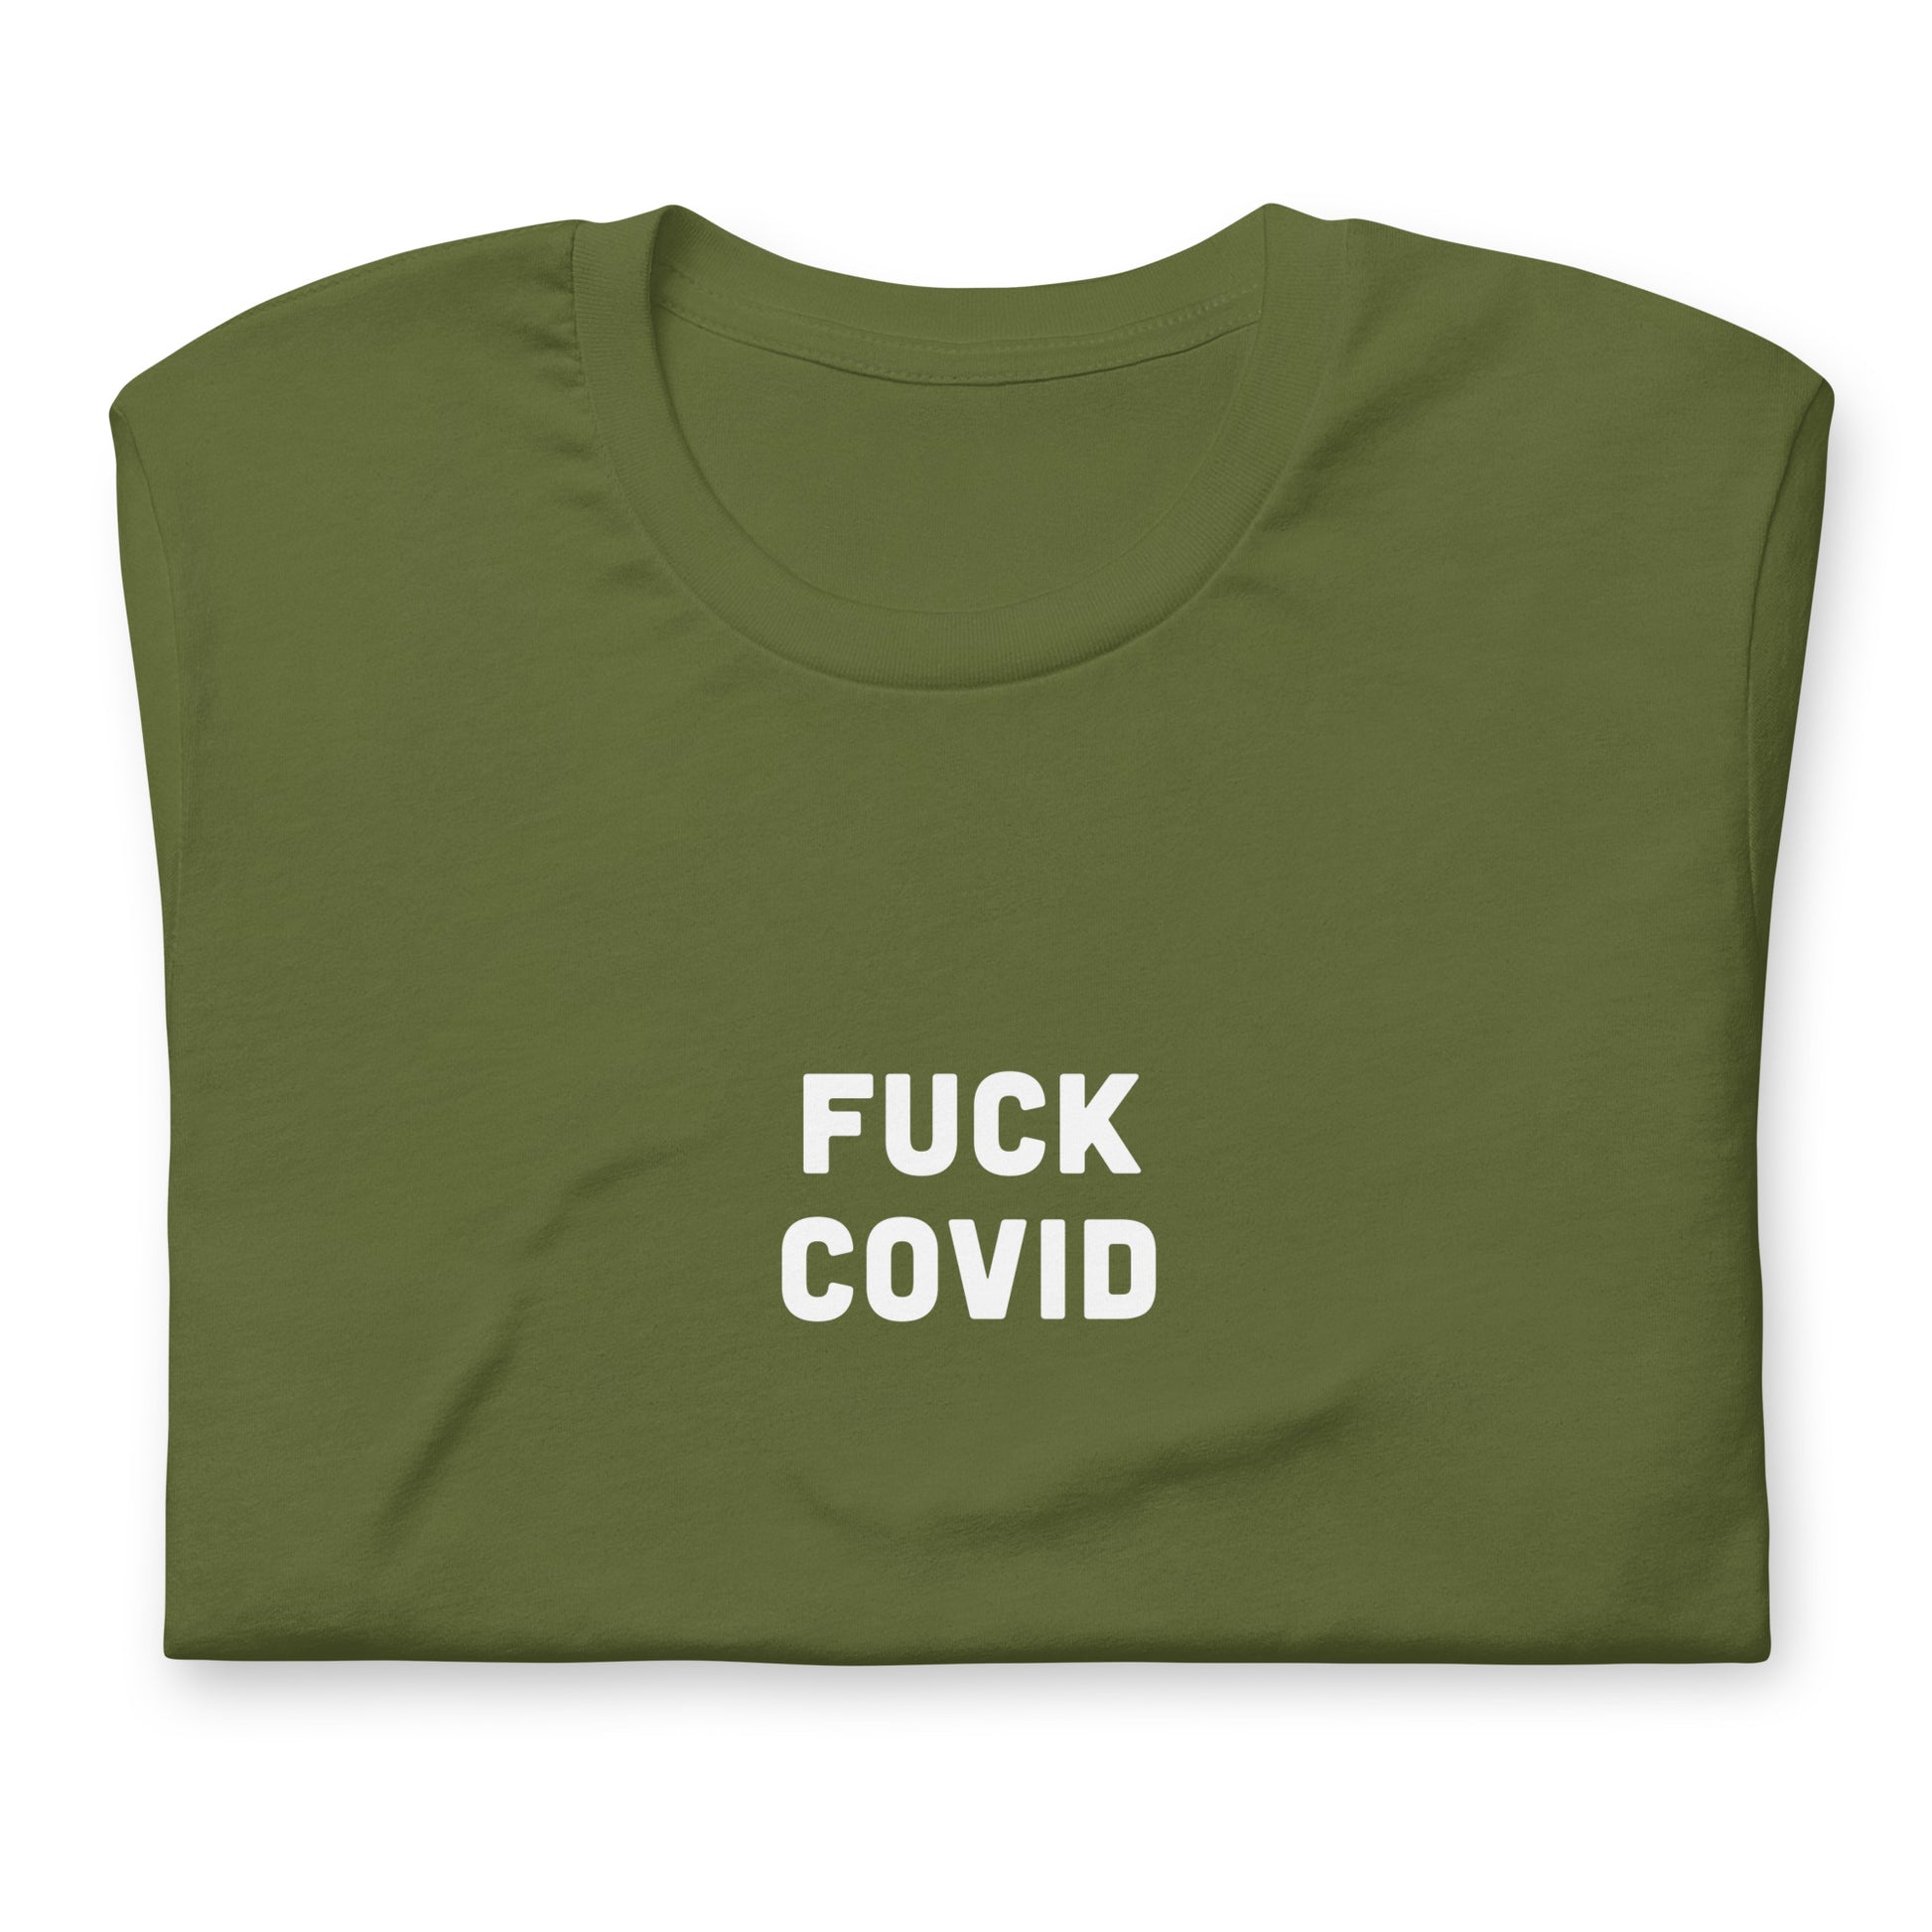 Fuck Covid T-Shirt Size S Color Navy